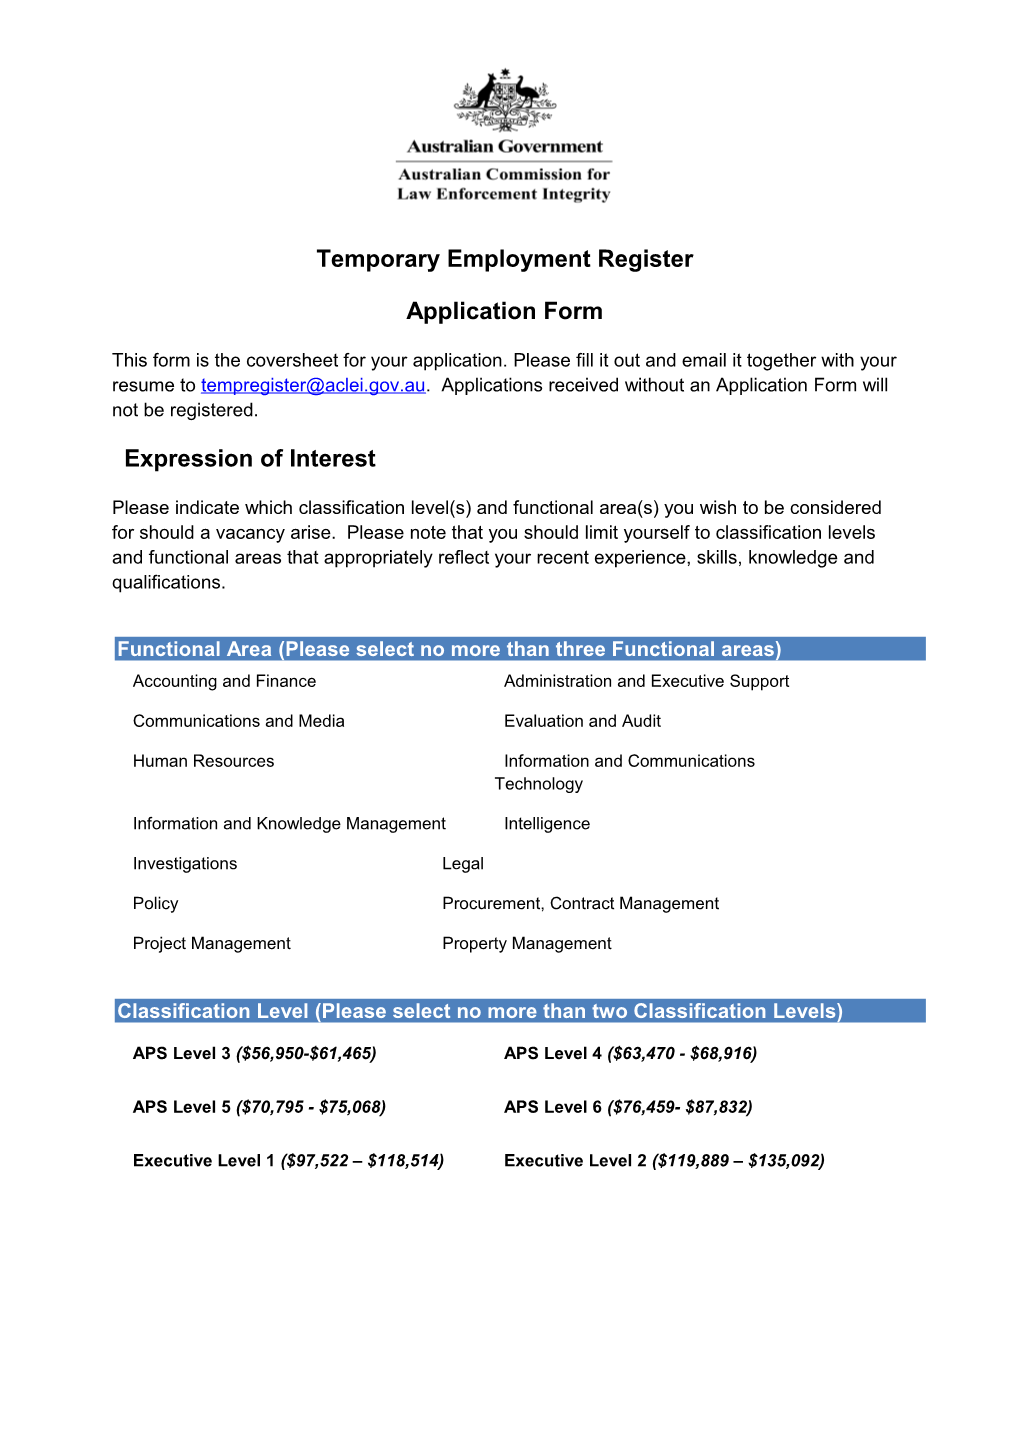 ACLEI Applicant Form Temporary Register